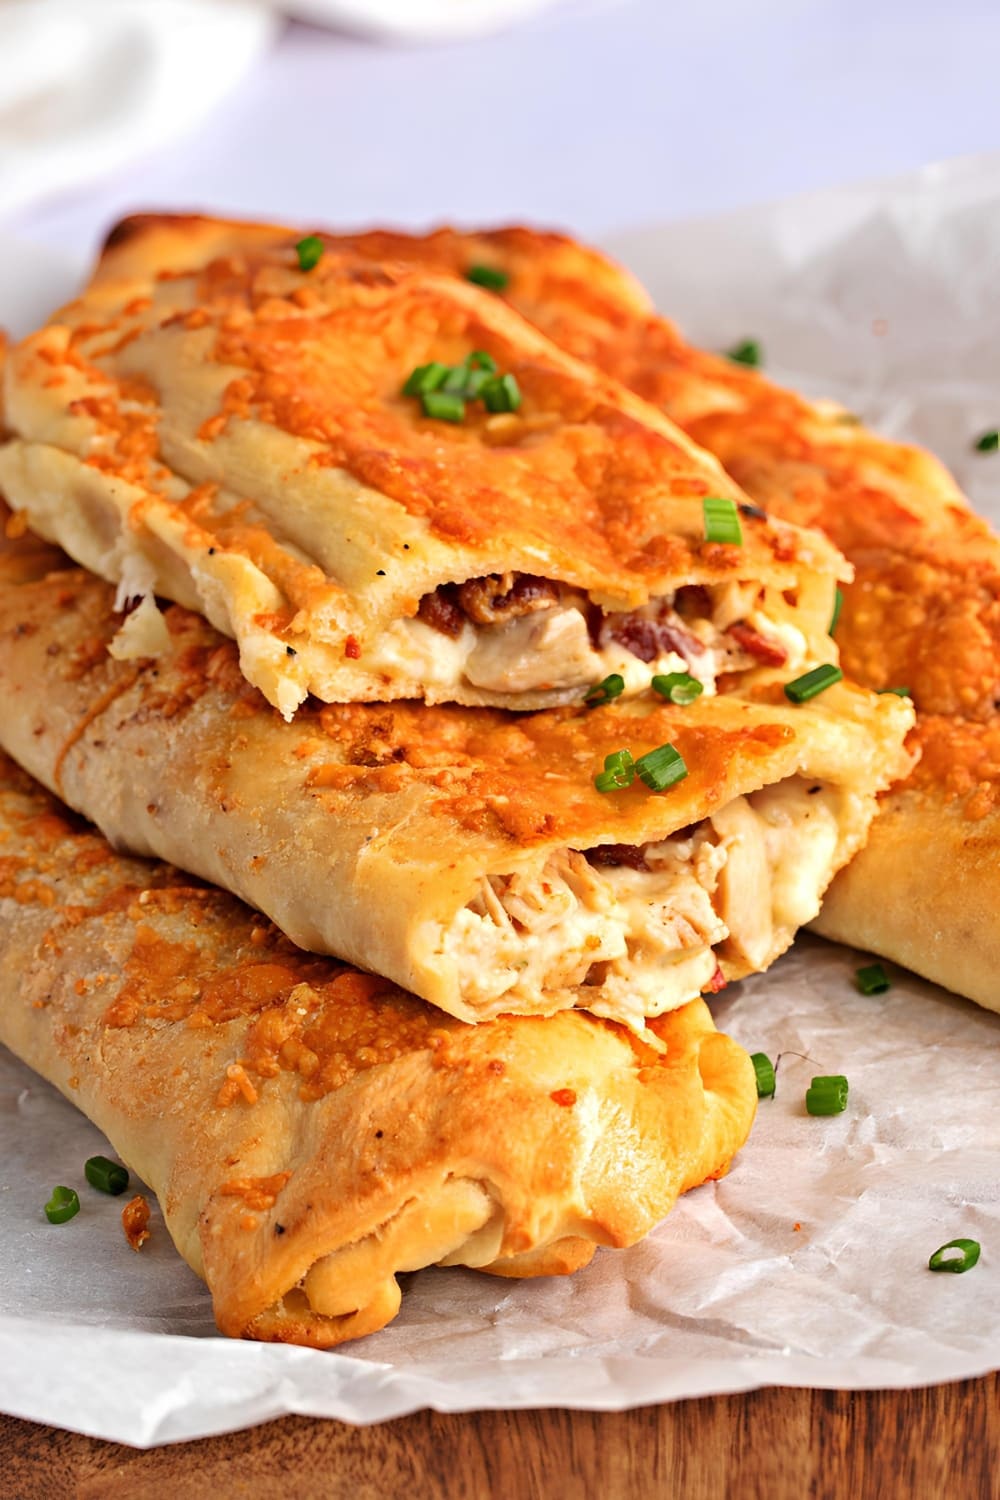 Whole and sliced in a half Costco Chicken Bake, stacked on a parchment paper, on top of a wooden table, garnished with chopped onions